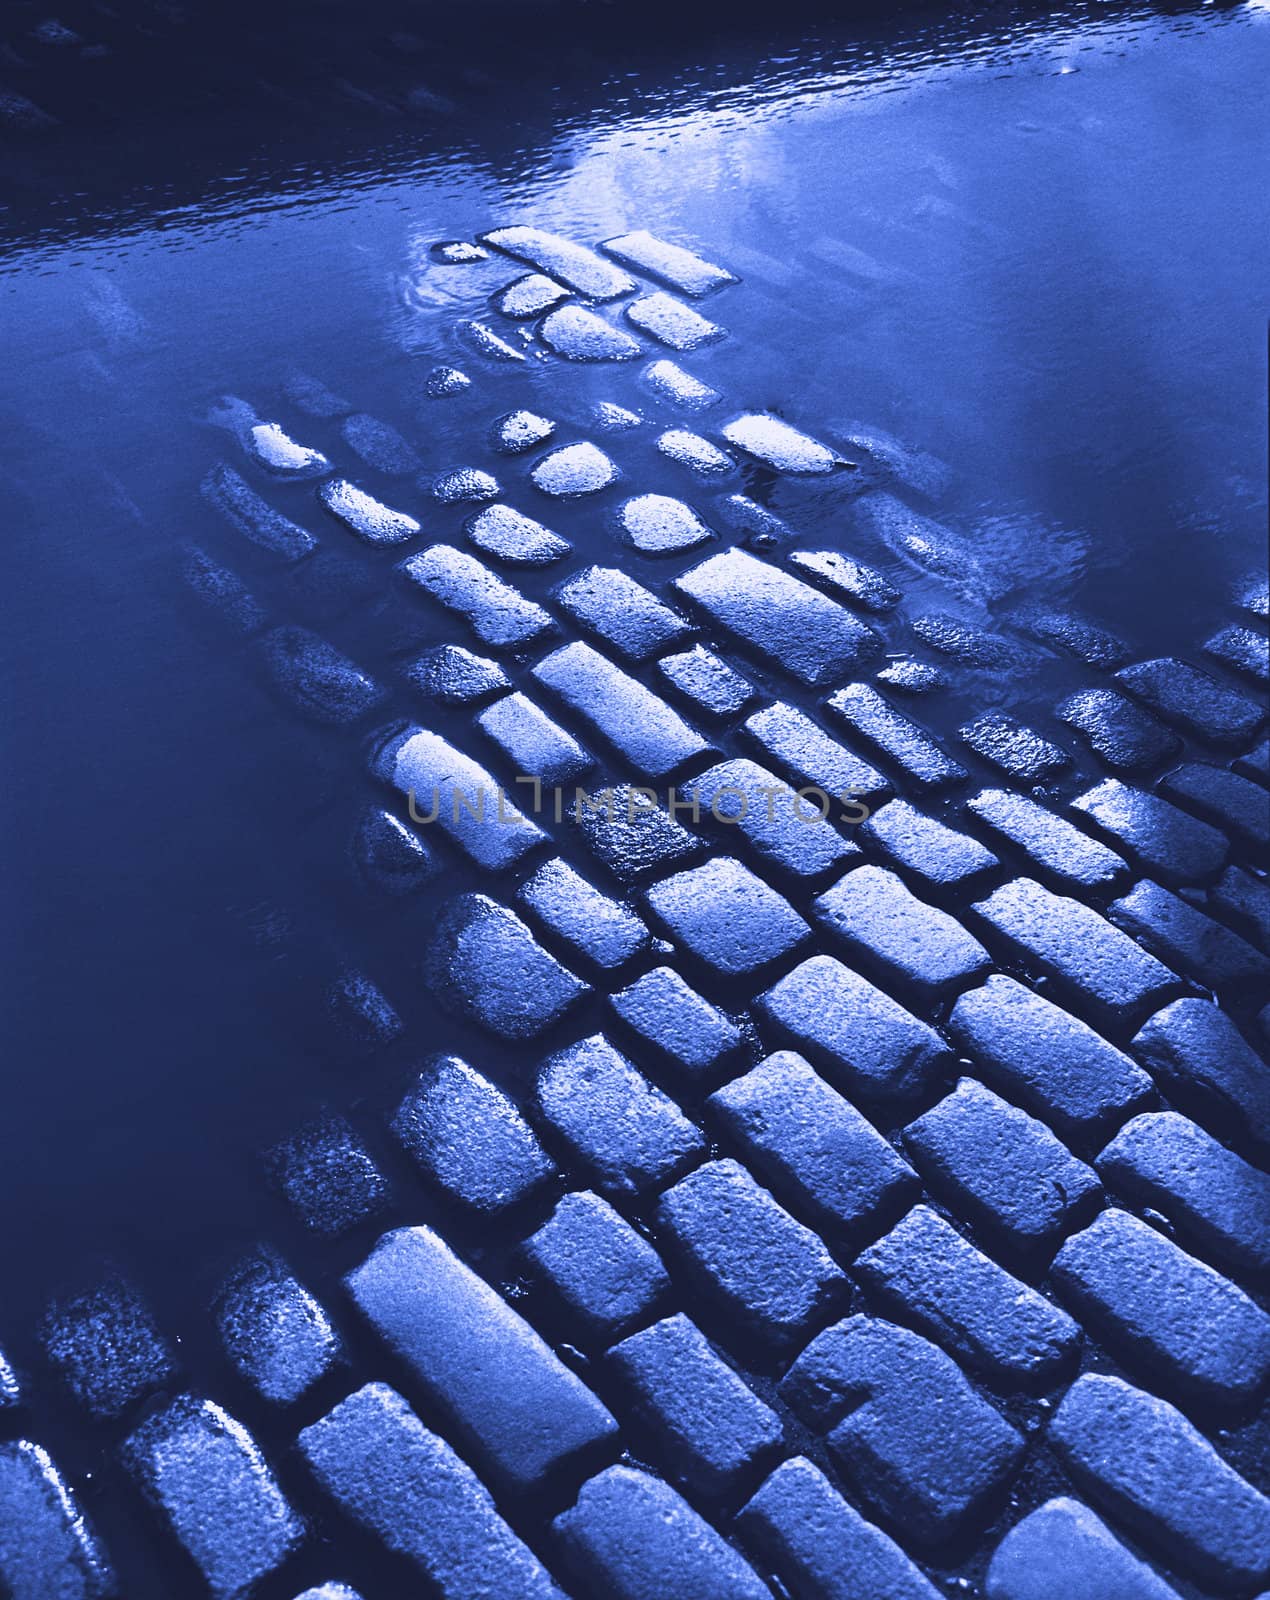 cobblestone road with water puddles in blue tones